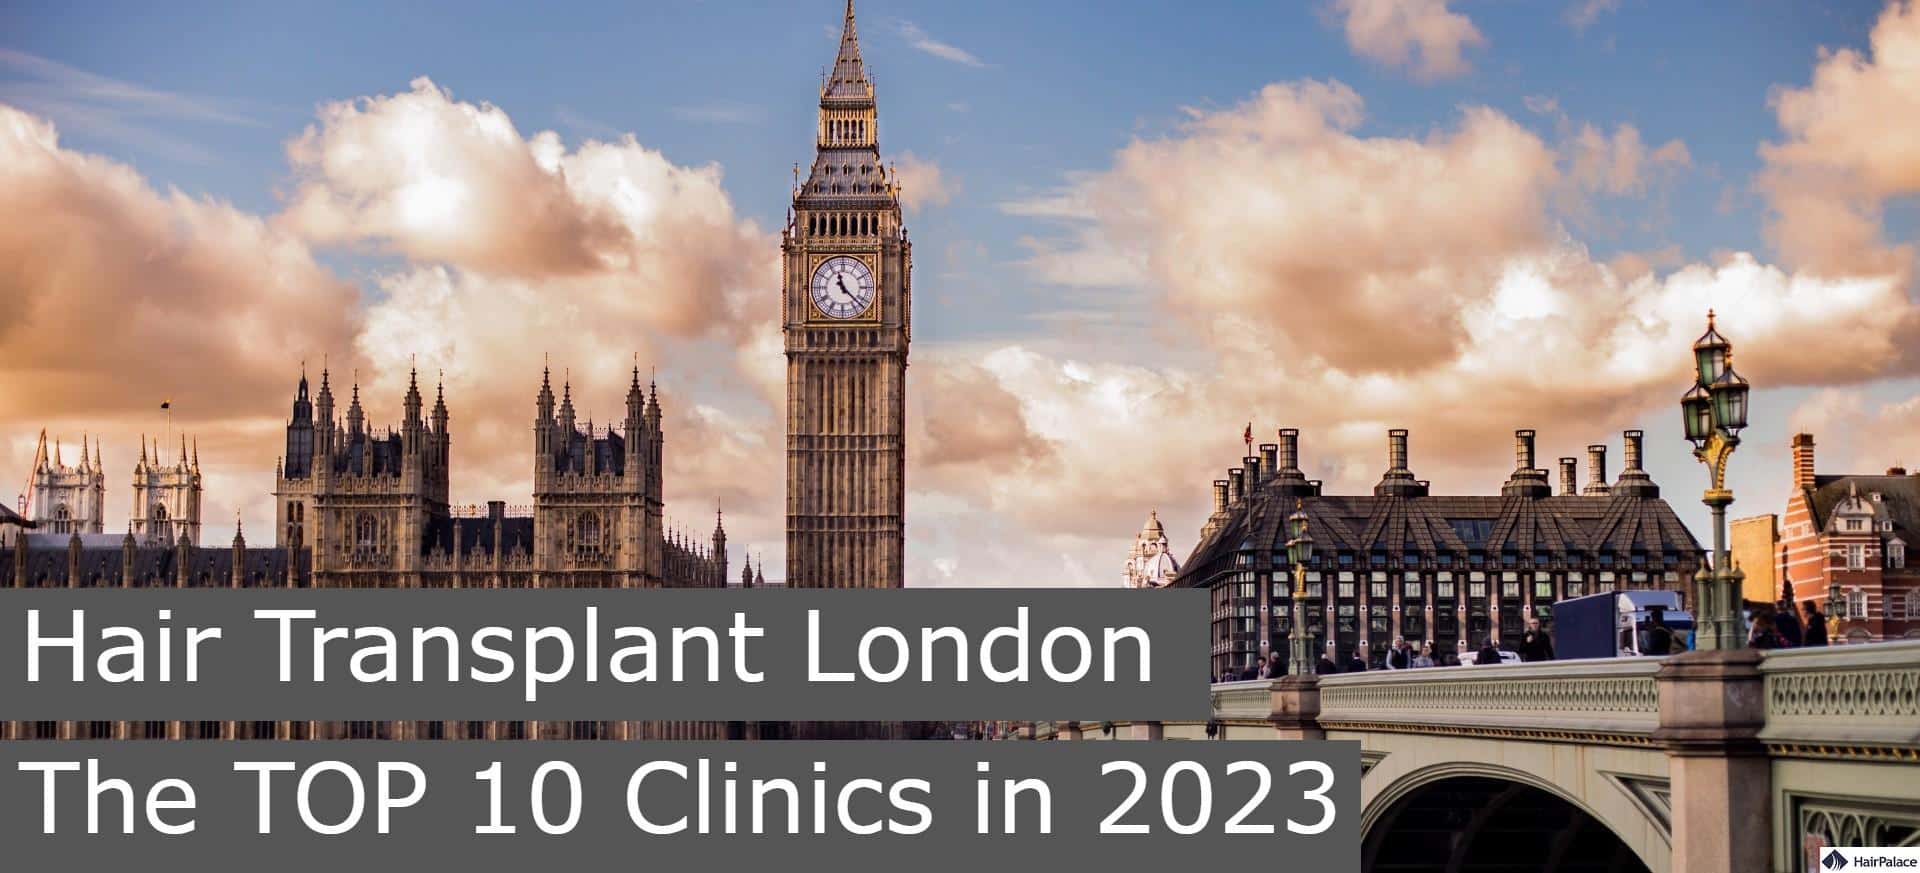 Hair transplant london the top 10 clinics in 2023